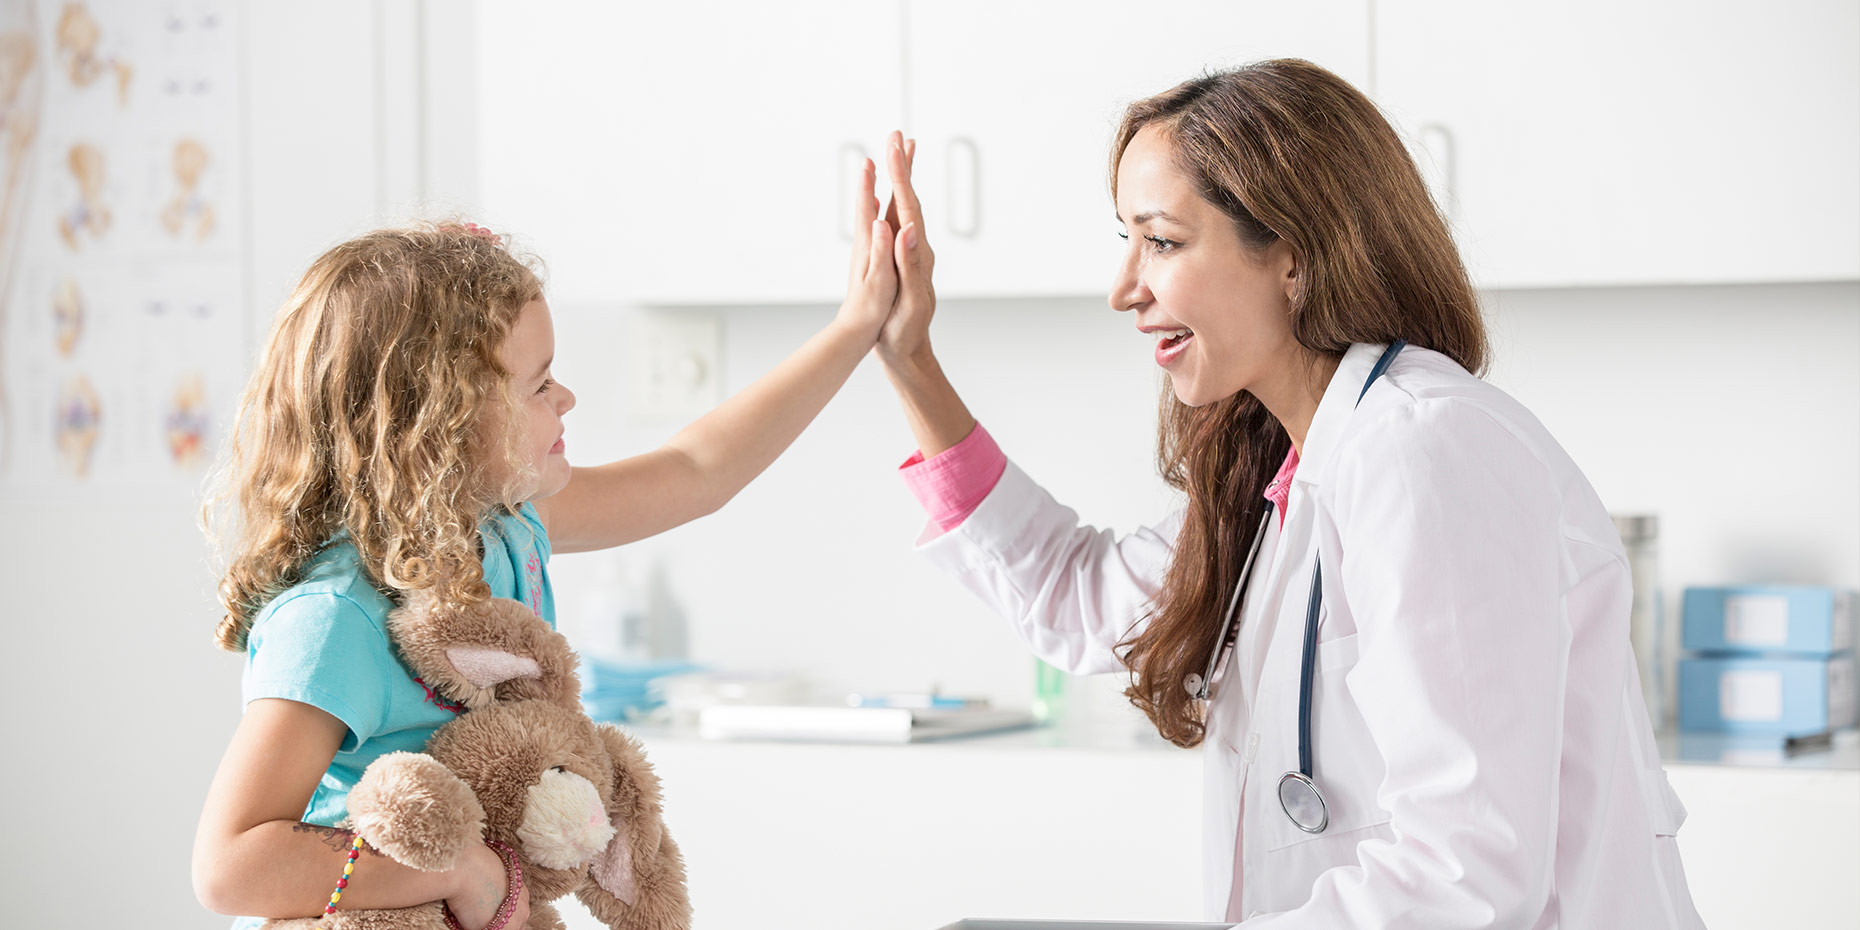 Child smiling high fiving doctor also smiling